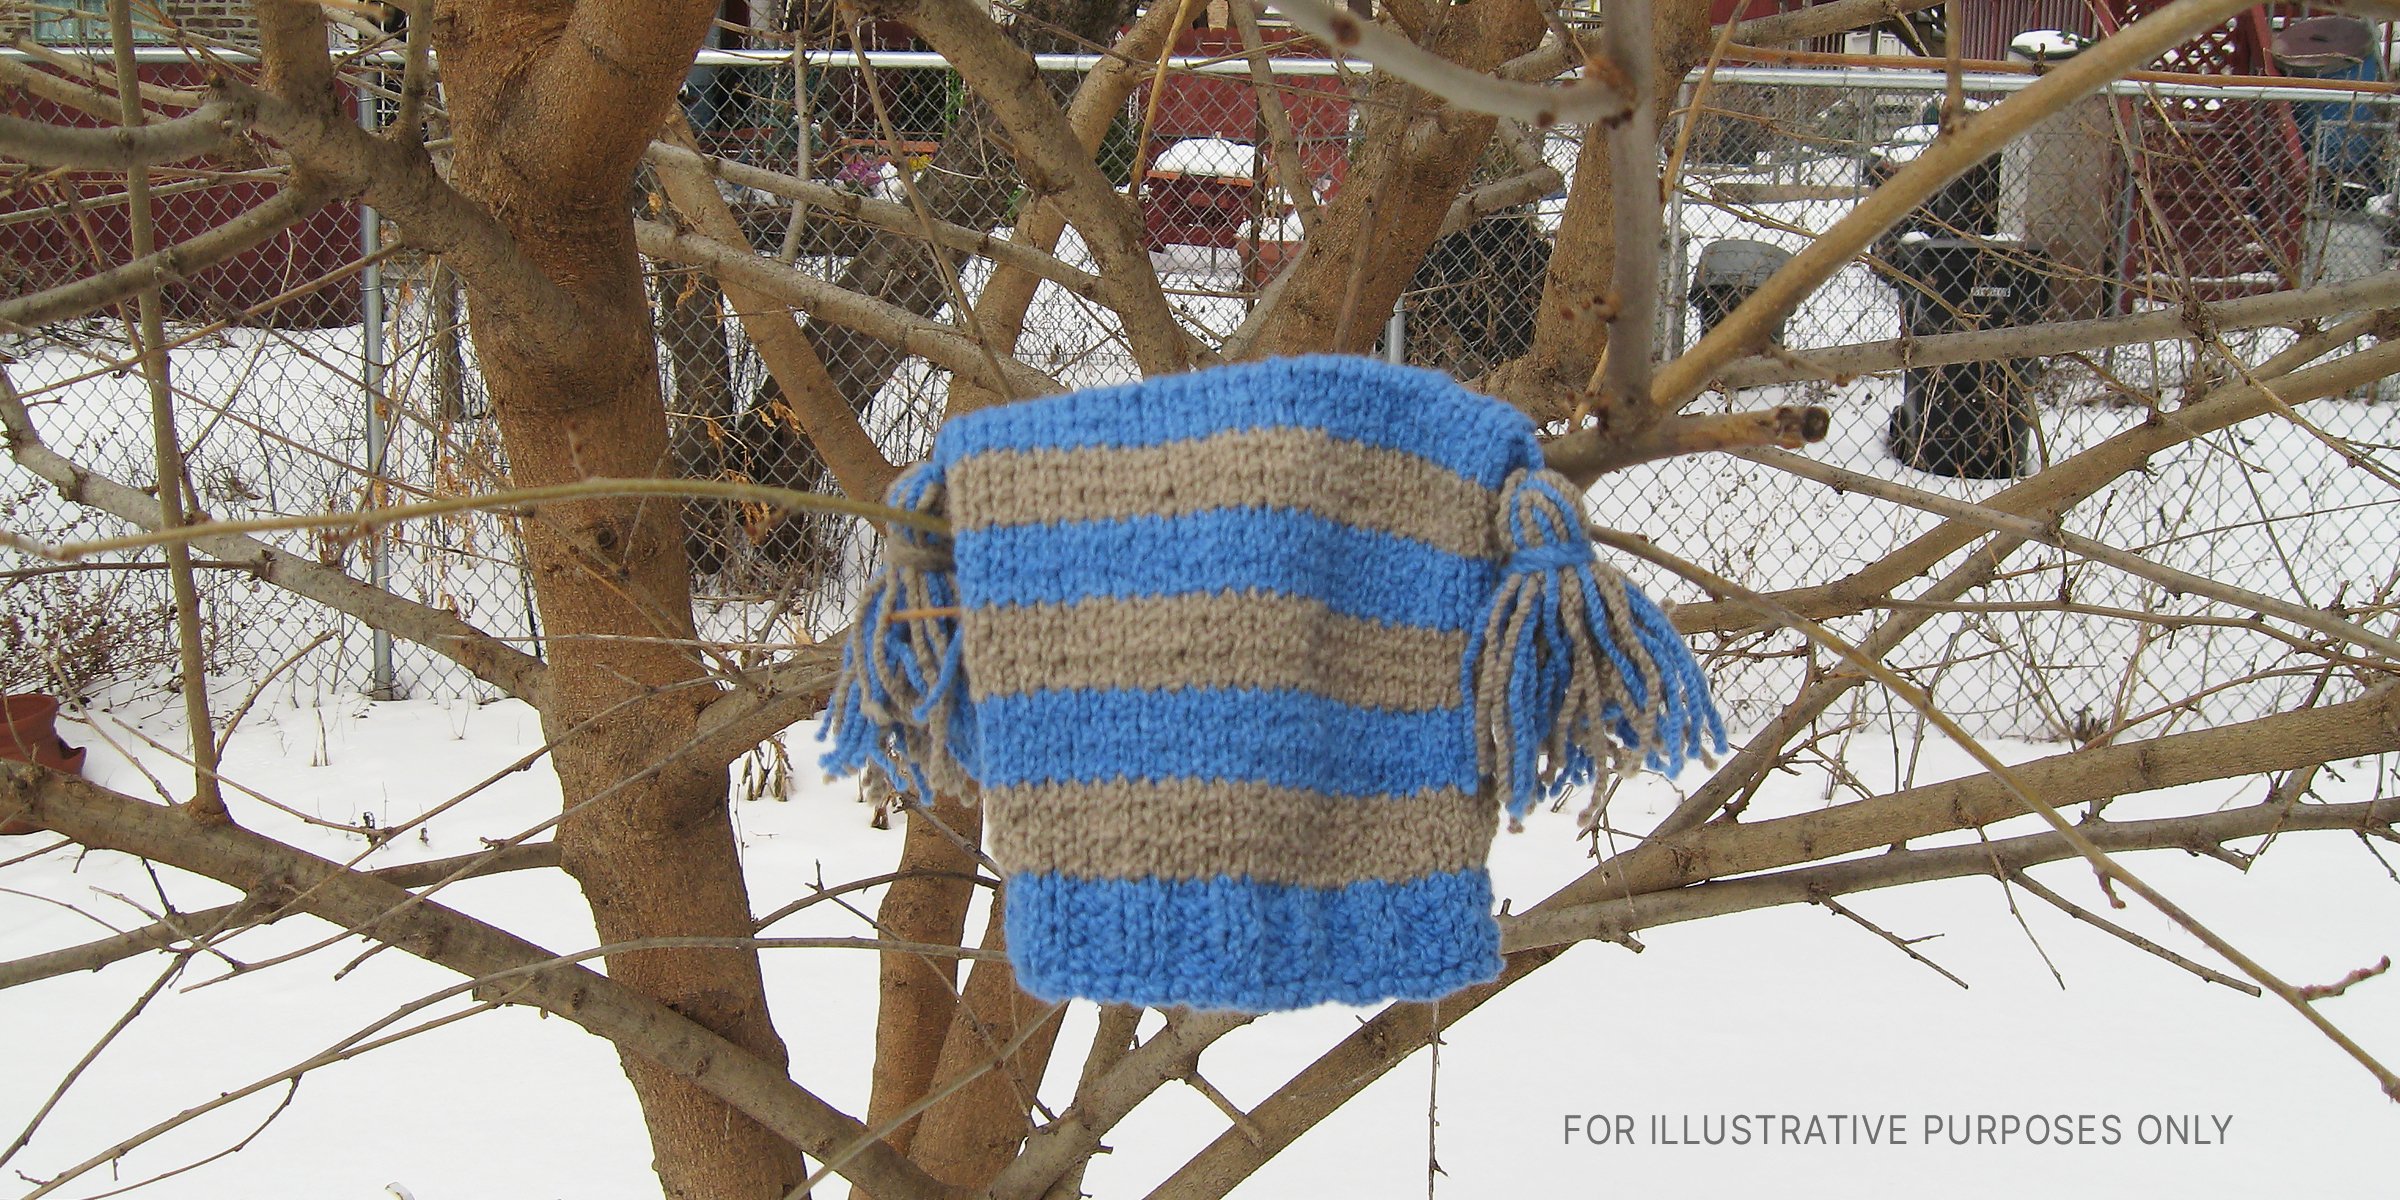 Flickr / moonrat42 (CC BY-SA 2.0) | A knitted cap hangs in a tree with snow in the background